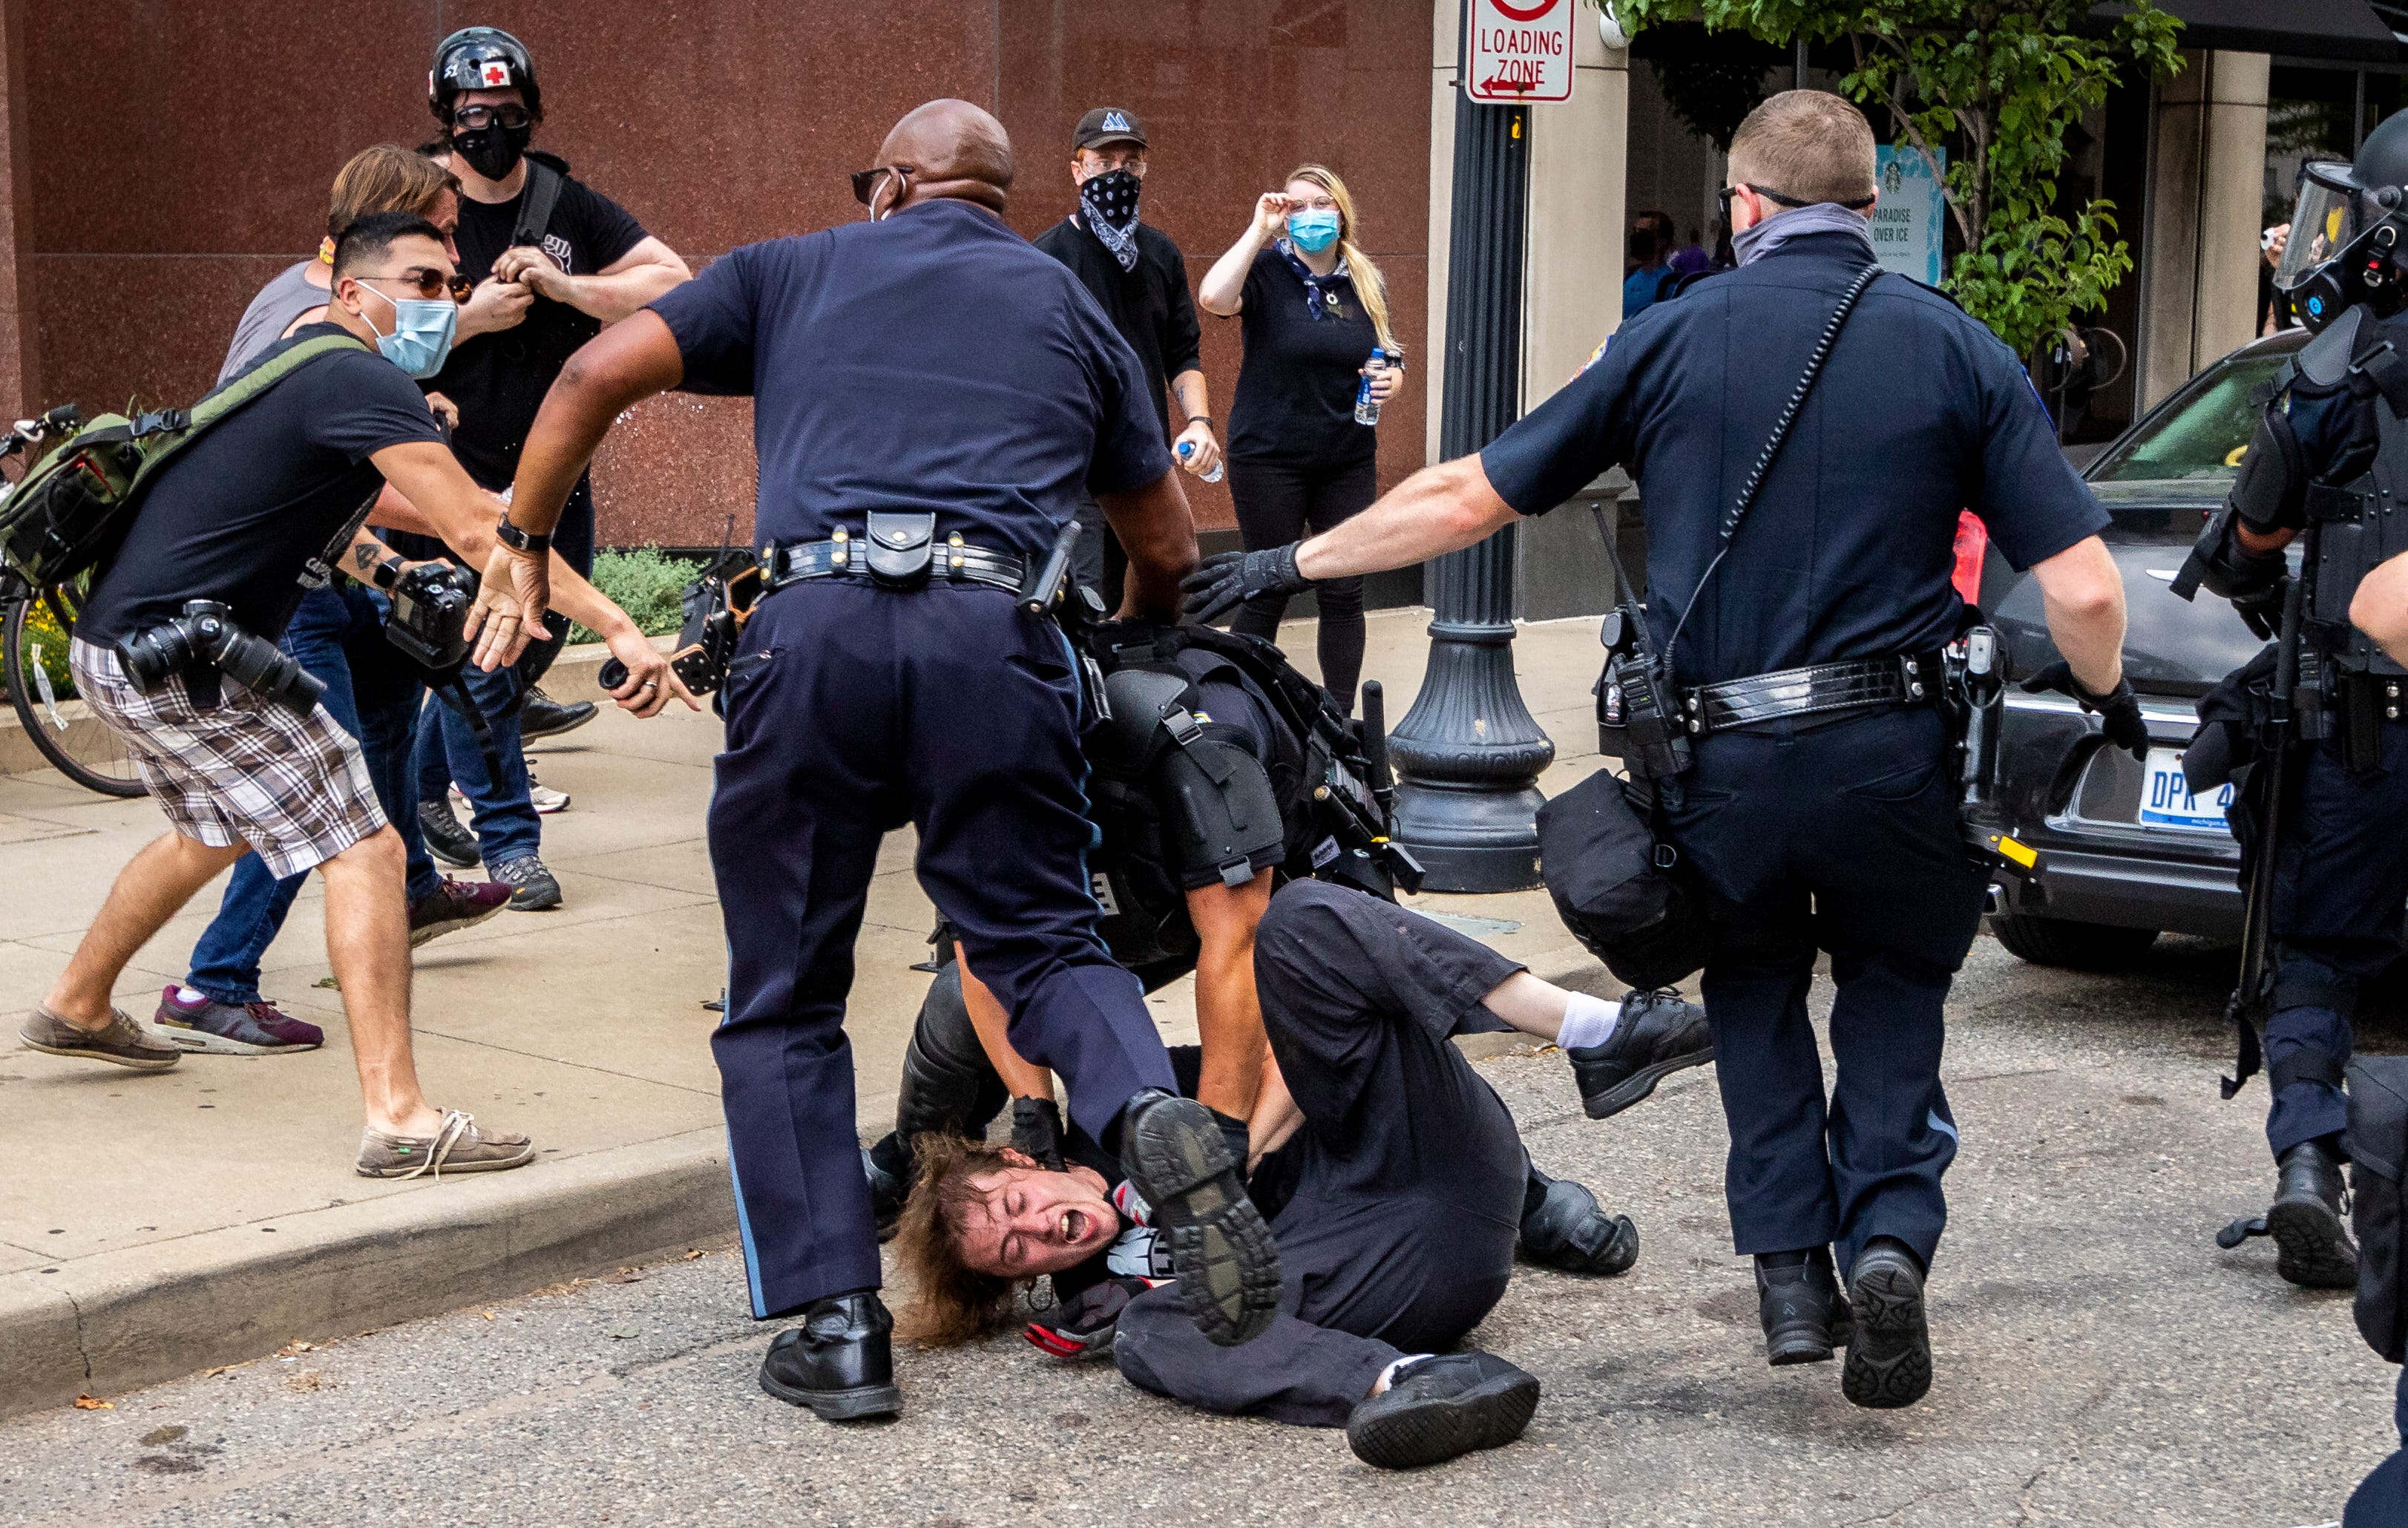 Kalamazoo Police arrest a counter-protestor during a Proud Boys march.